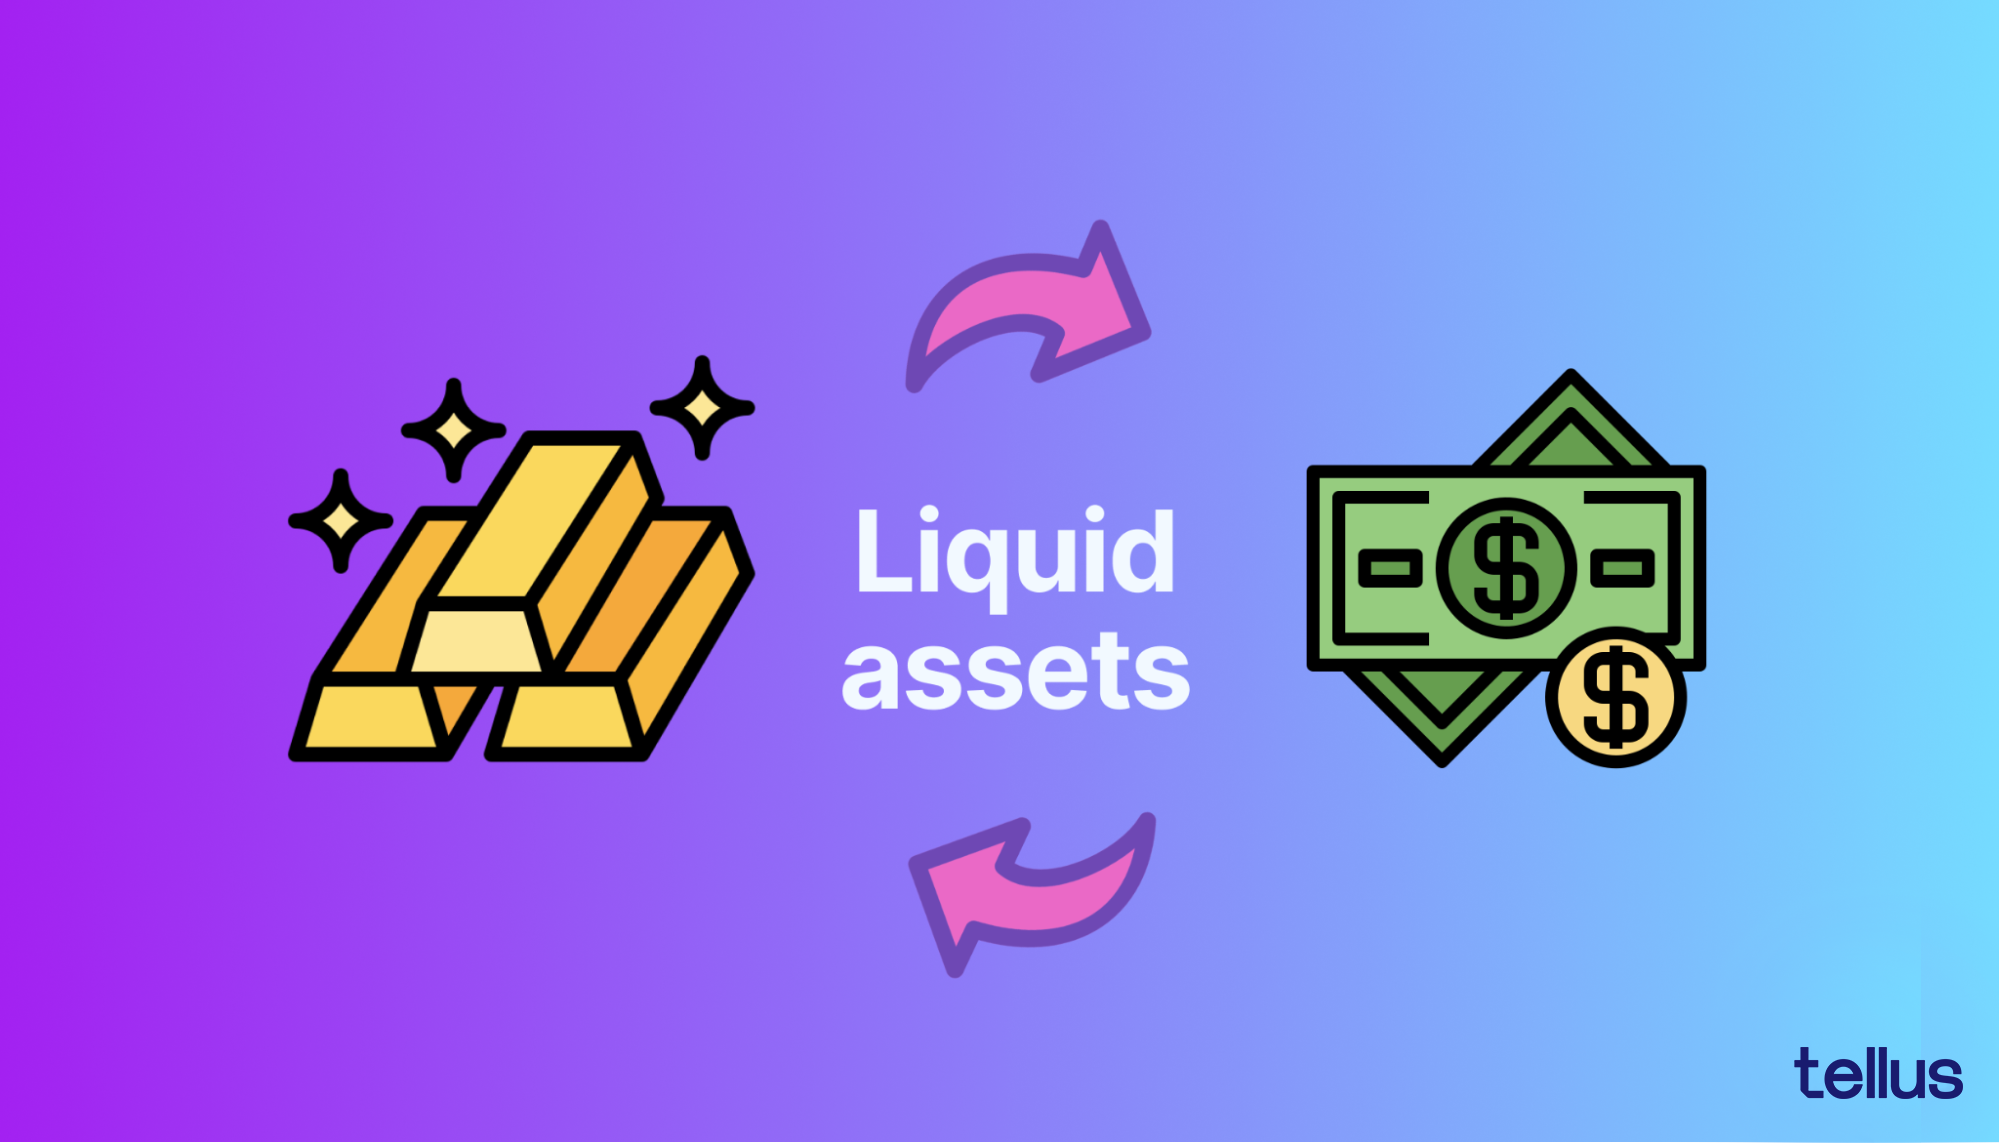 Is there any way to get the Liquid assets achievement more easily?